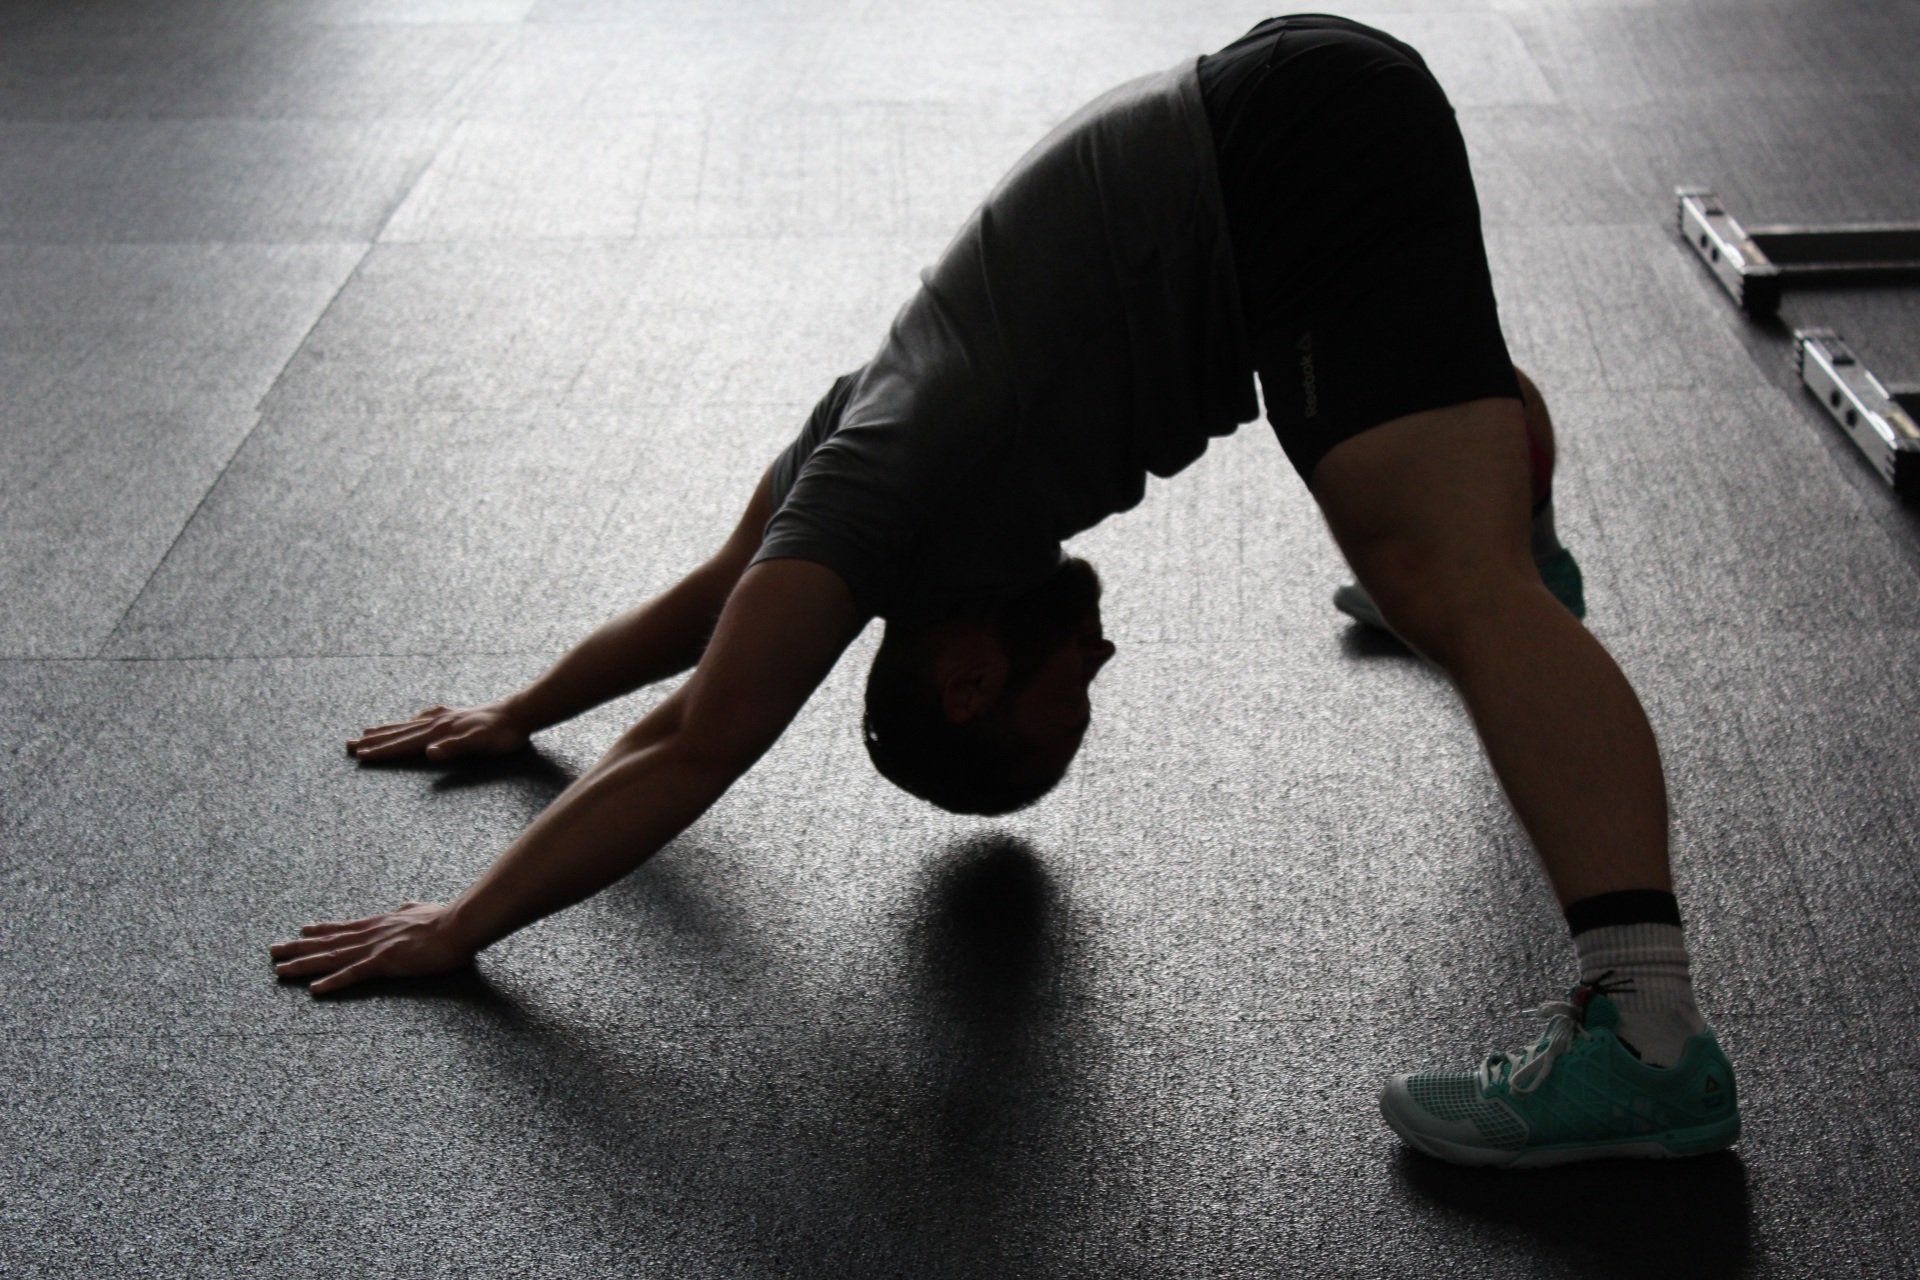 A man is doing a yoga pose on the floor in a gym.